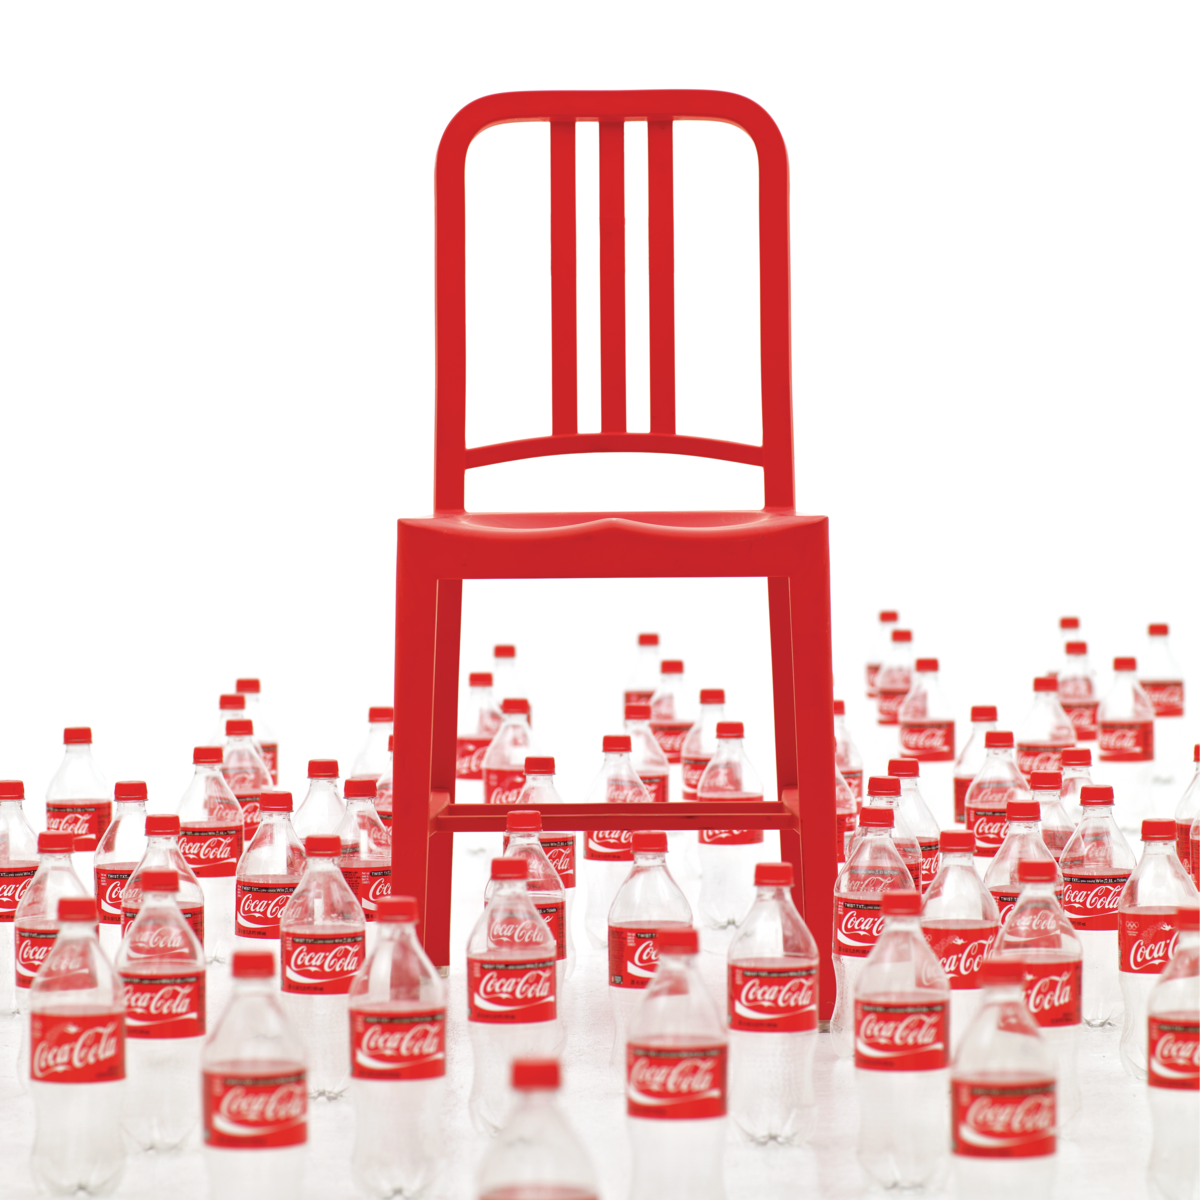 Navy Chair surrounded by empty Coca-Cola bottles.